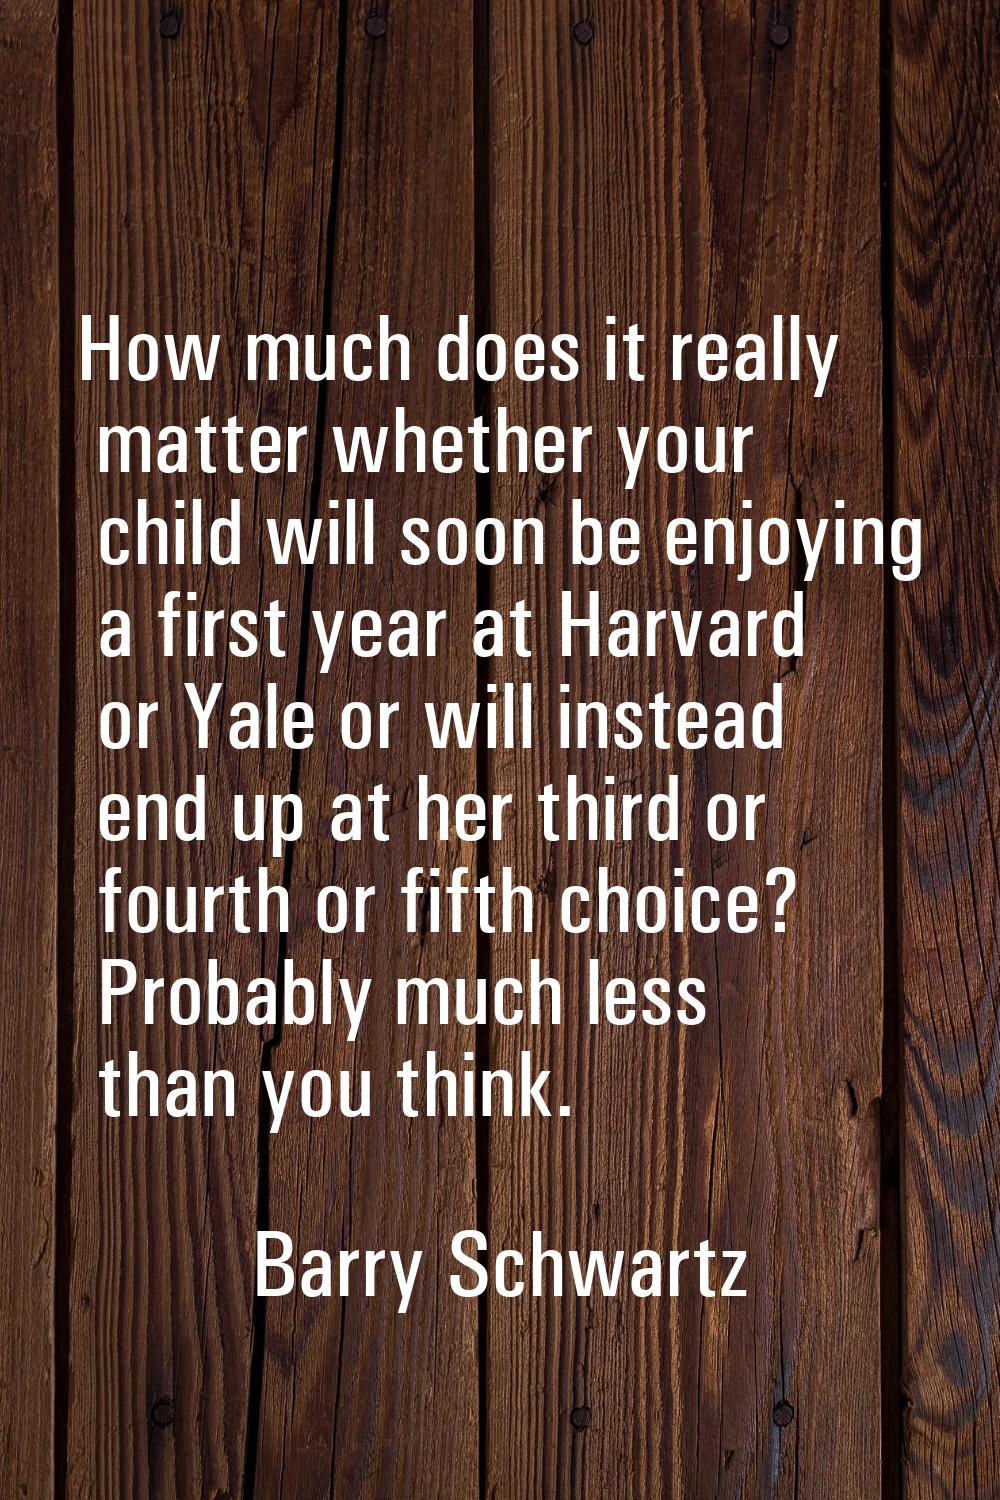 How much does it really matter whether your child will soon be enjoying a first year at Harvard or 